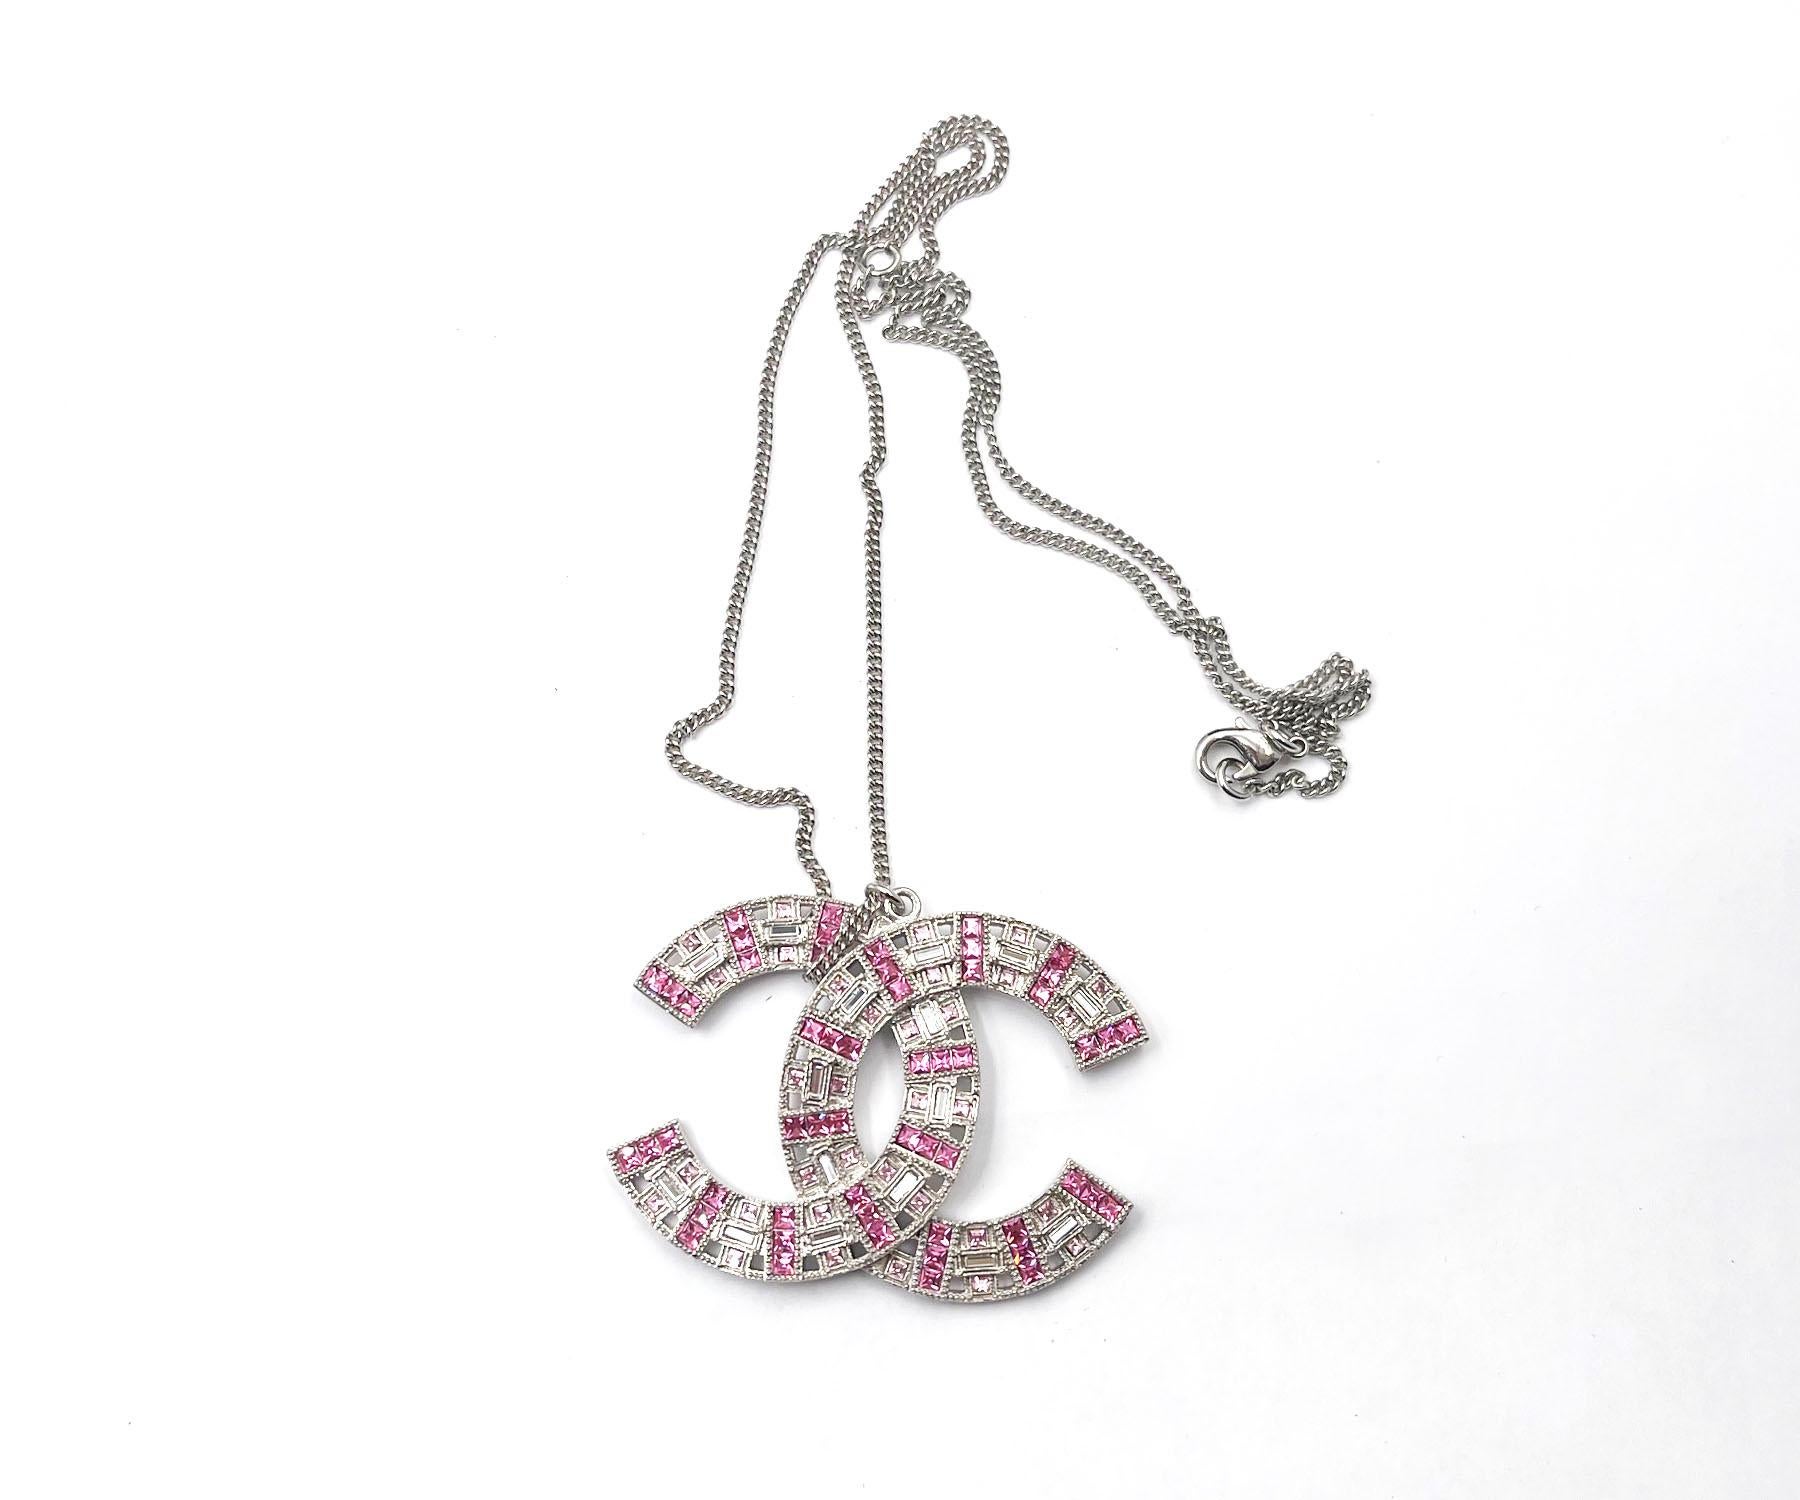 Chanel Silver CC Pink Baguette Crystal Large Pendant Necklace

*Marked 17
*Made in France
*Comes with the original box and pouch

-It is approximately 16